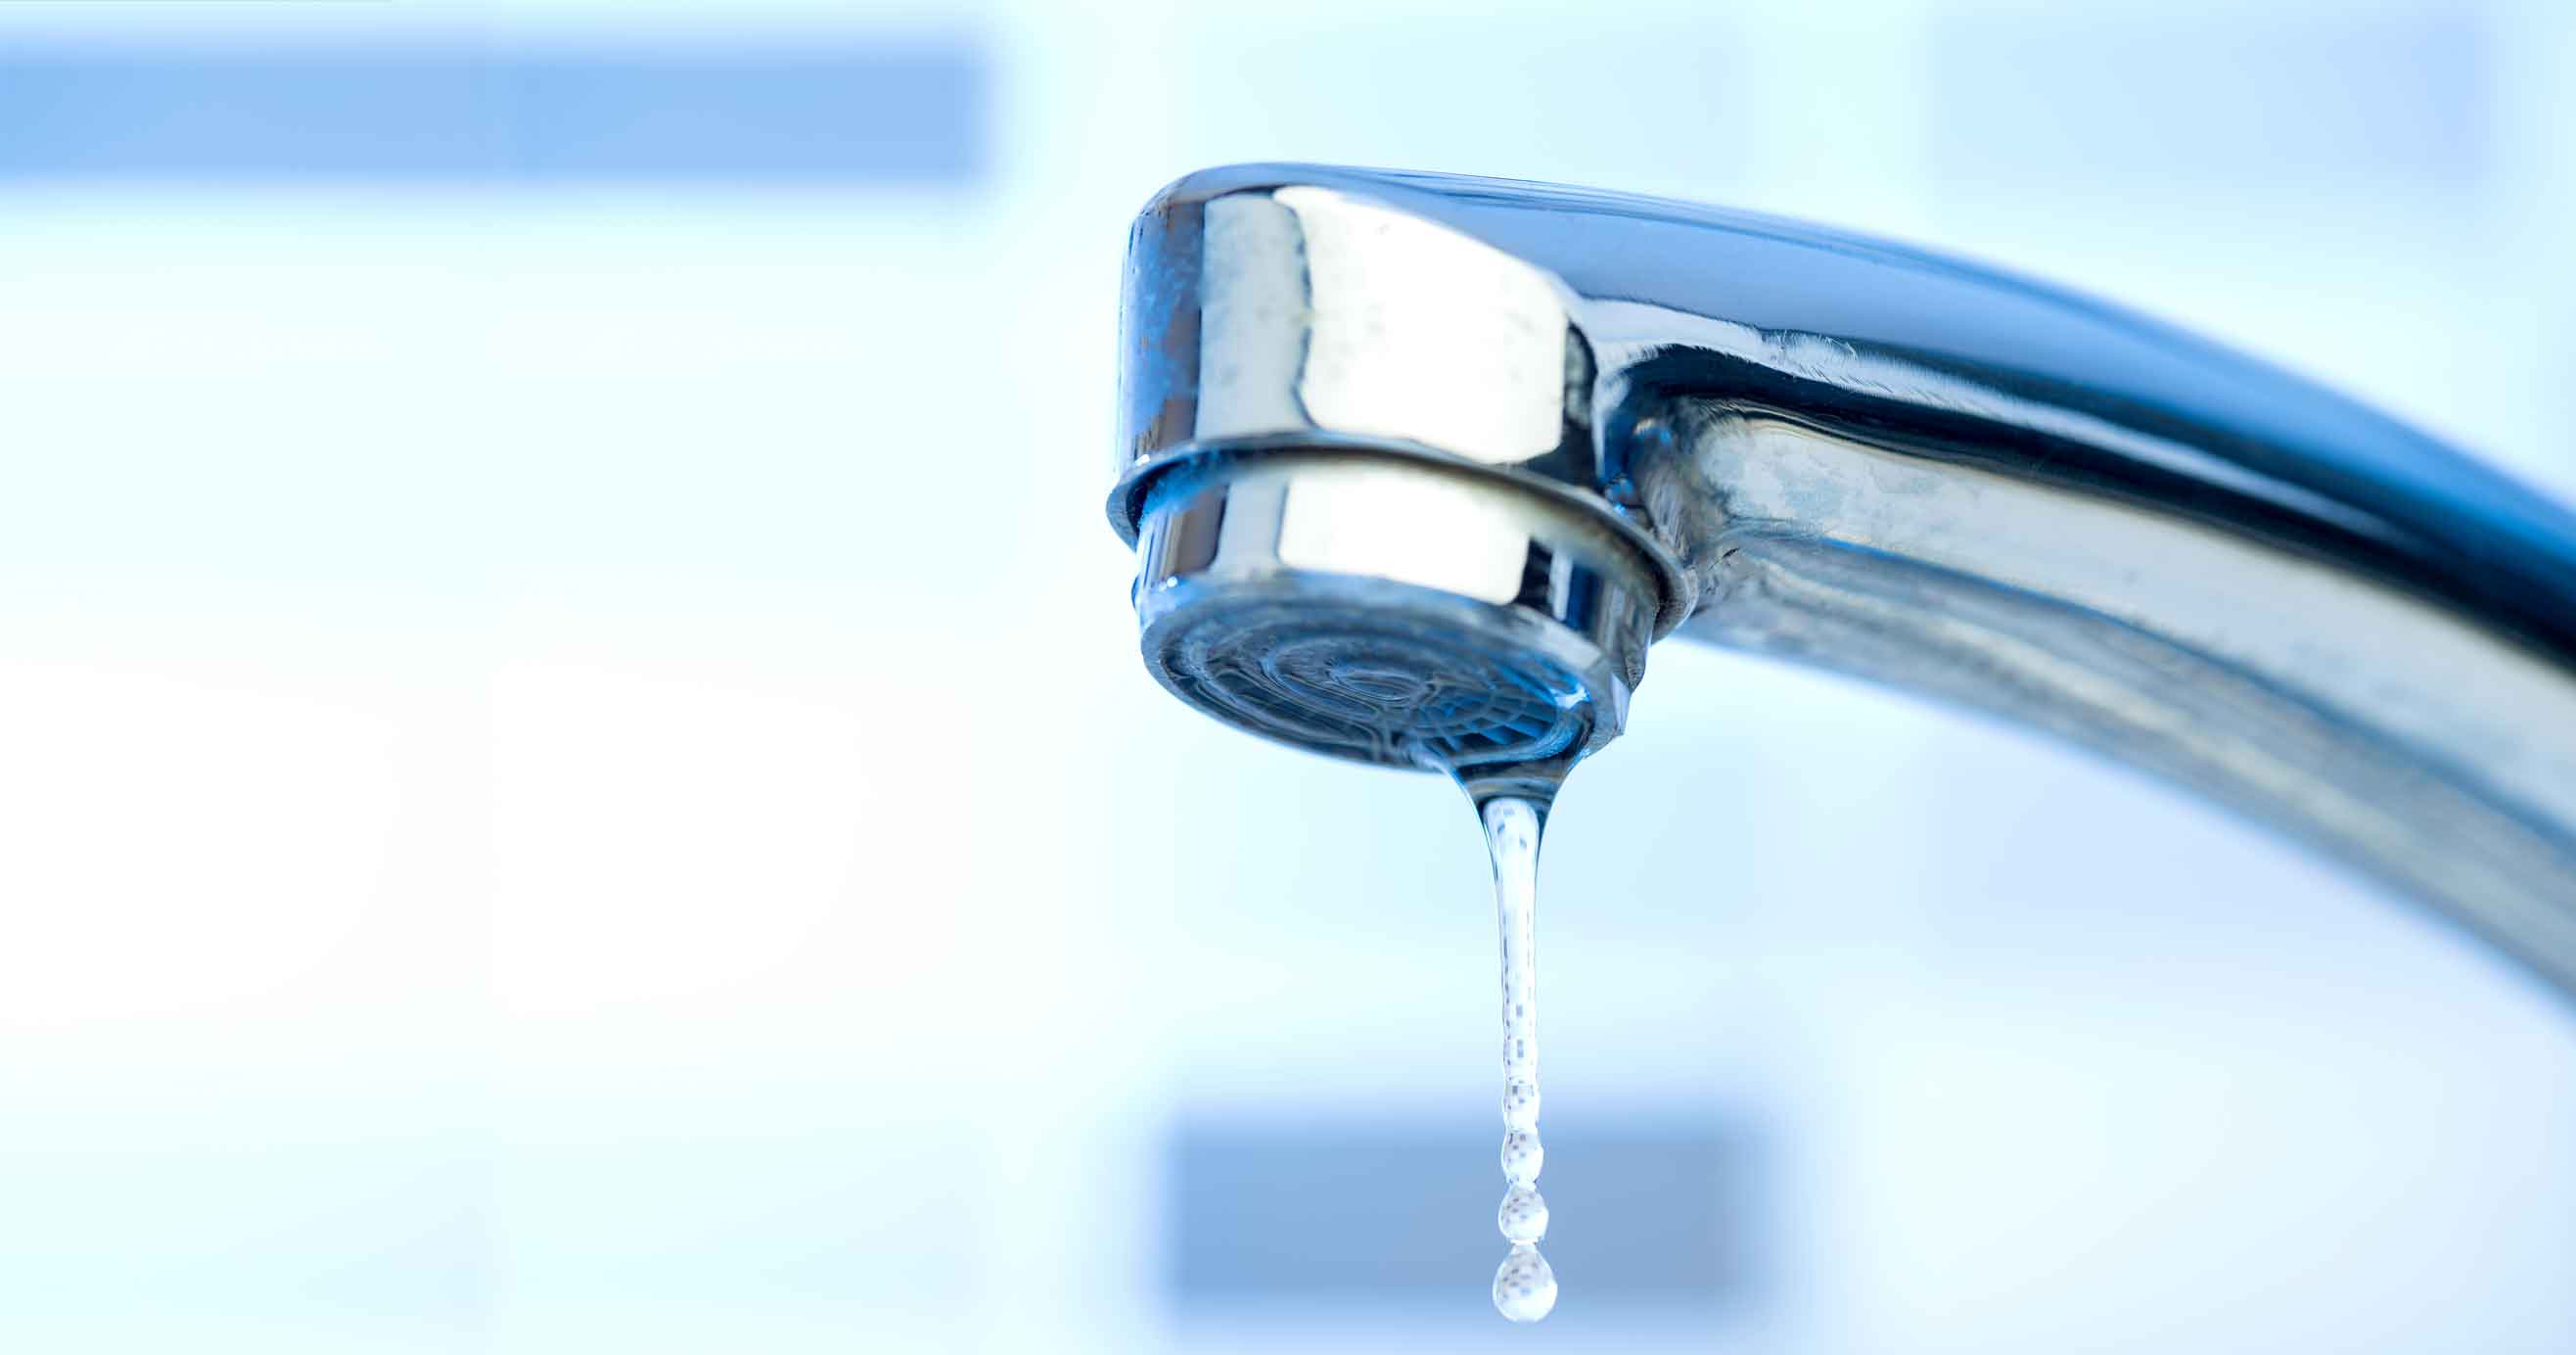 Tips for fixing Leaky Faucets